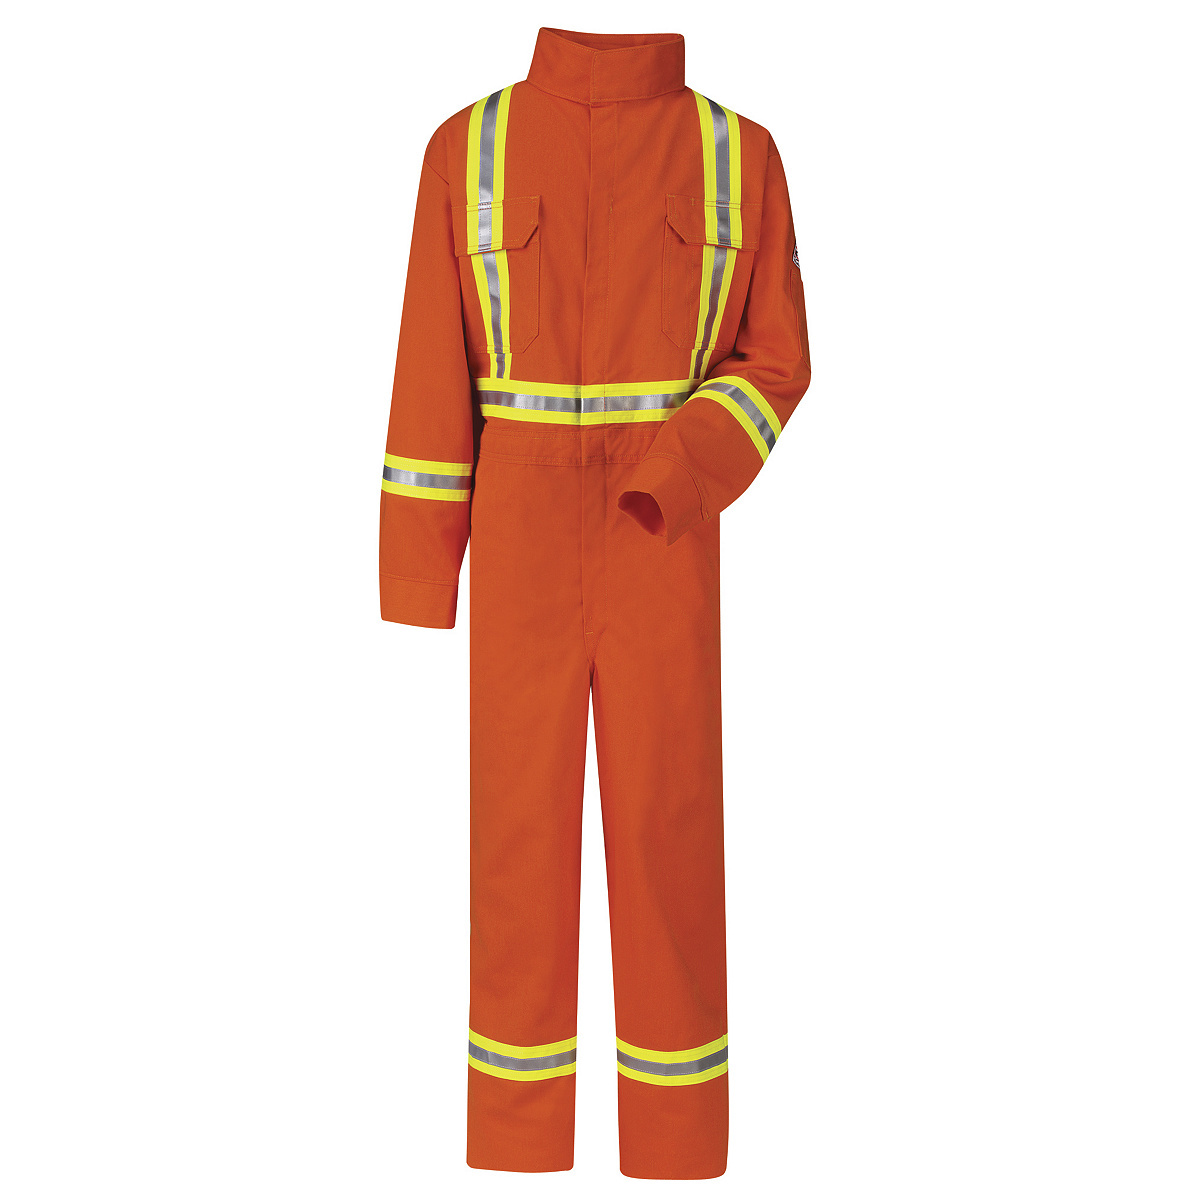 Bulwark® 52 Tall Orange Westex Ultrasoft® Twill/Cotton/Nylon Flame Resistant Coveralls With Zipper Front Closure And Reflective